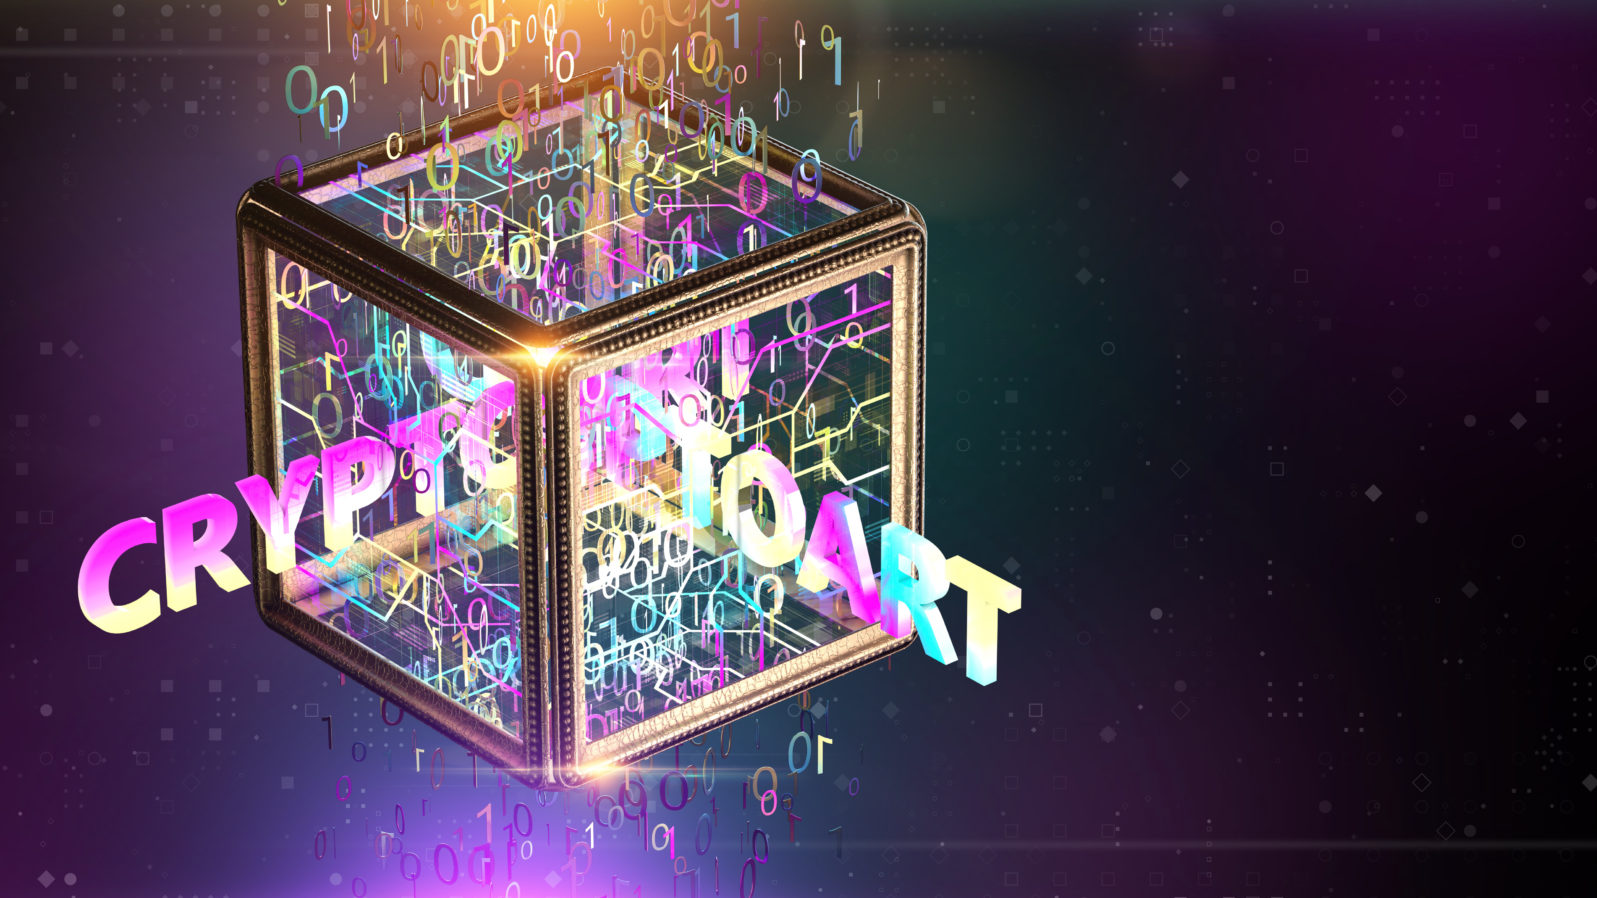 NFT non fungible tokenscrypto art on colorful abstract background. Pay for unique collectibles in games or art. 3d render of NFT crypto art collectibles concept